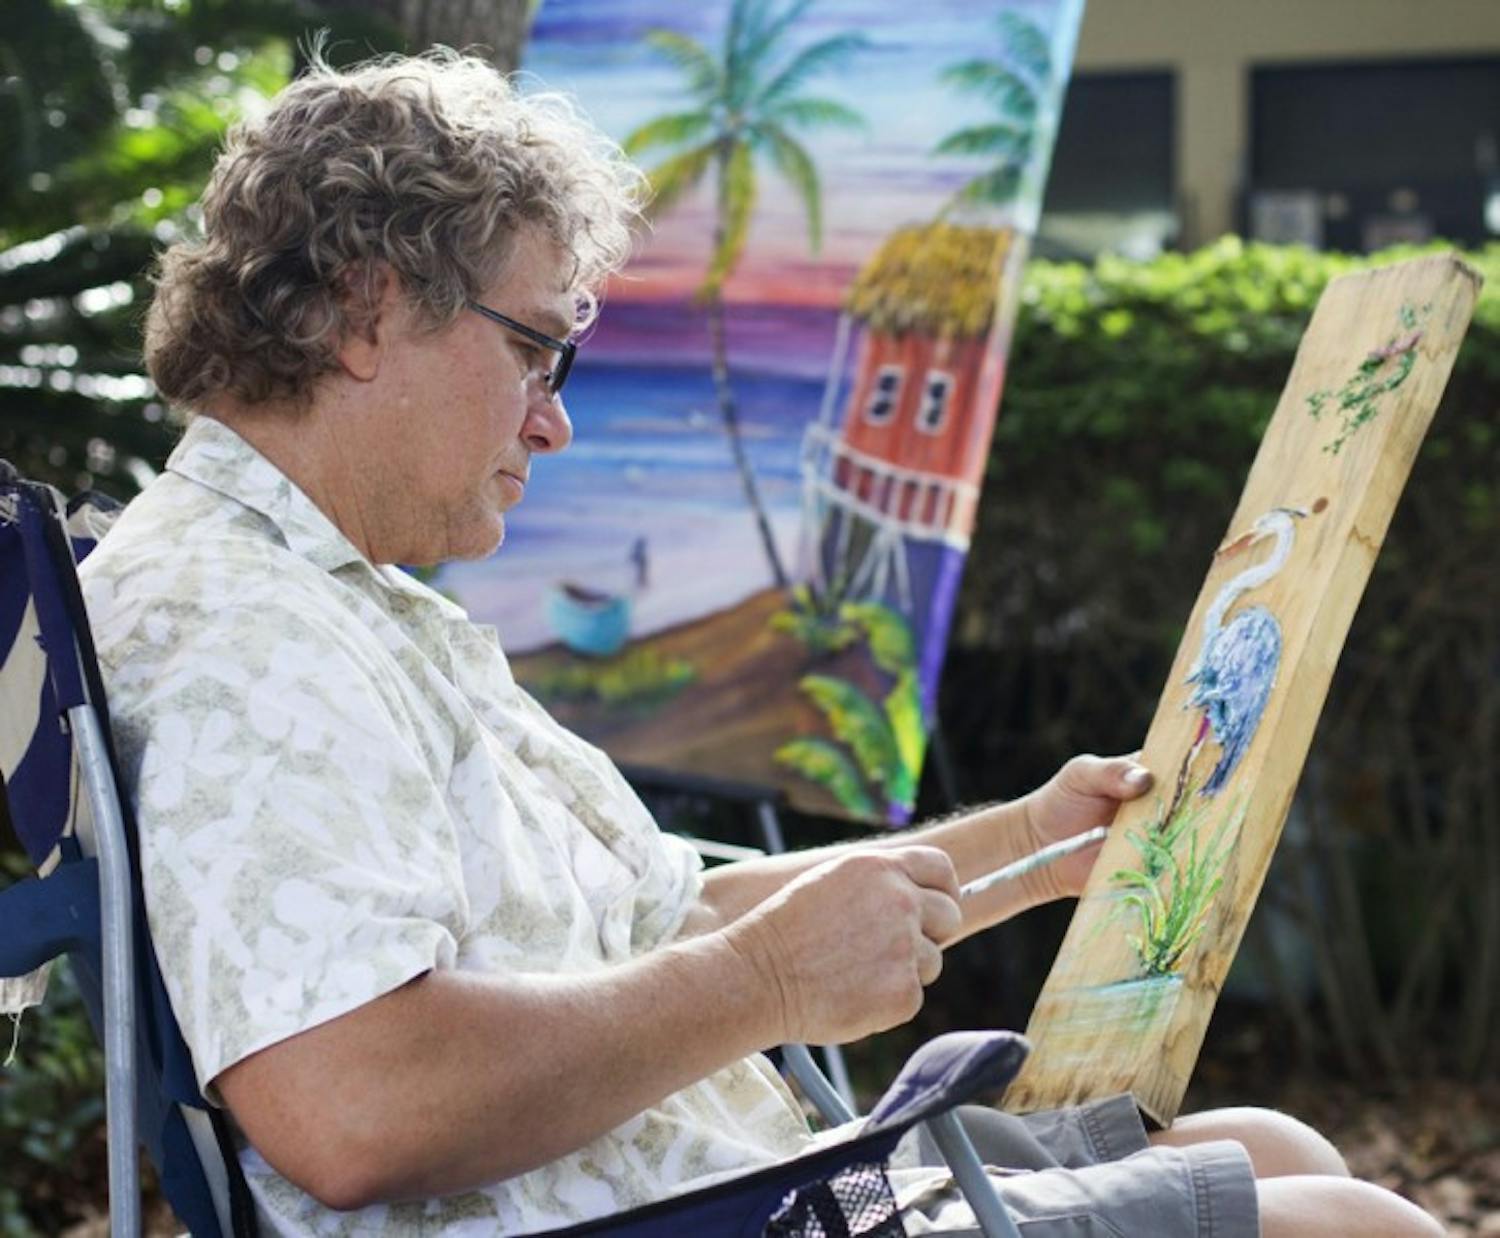 Dennis Shattuck, a 58-year-old painter from Palm Bay, touches up his 3-D crane painting at the Gainesville Fine Arts Association's 28th annual GFAA Art Festival at Thornebrook over the weekend.